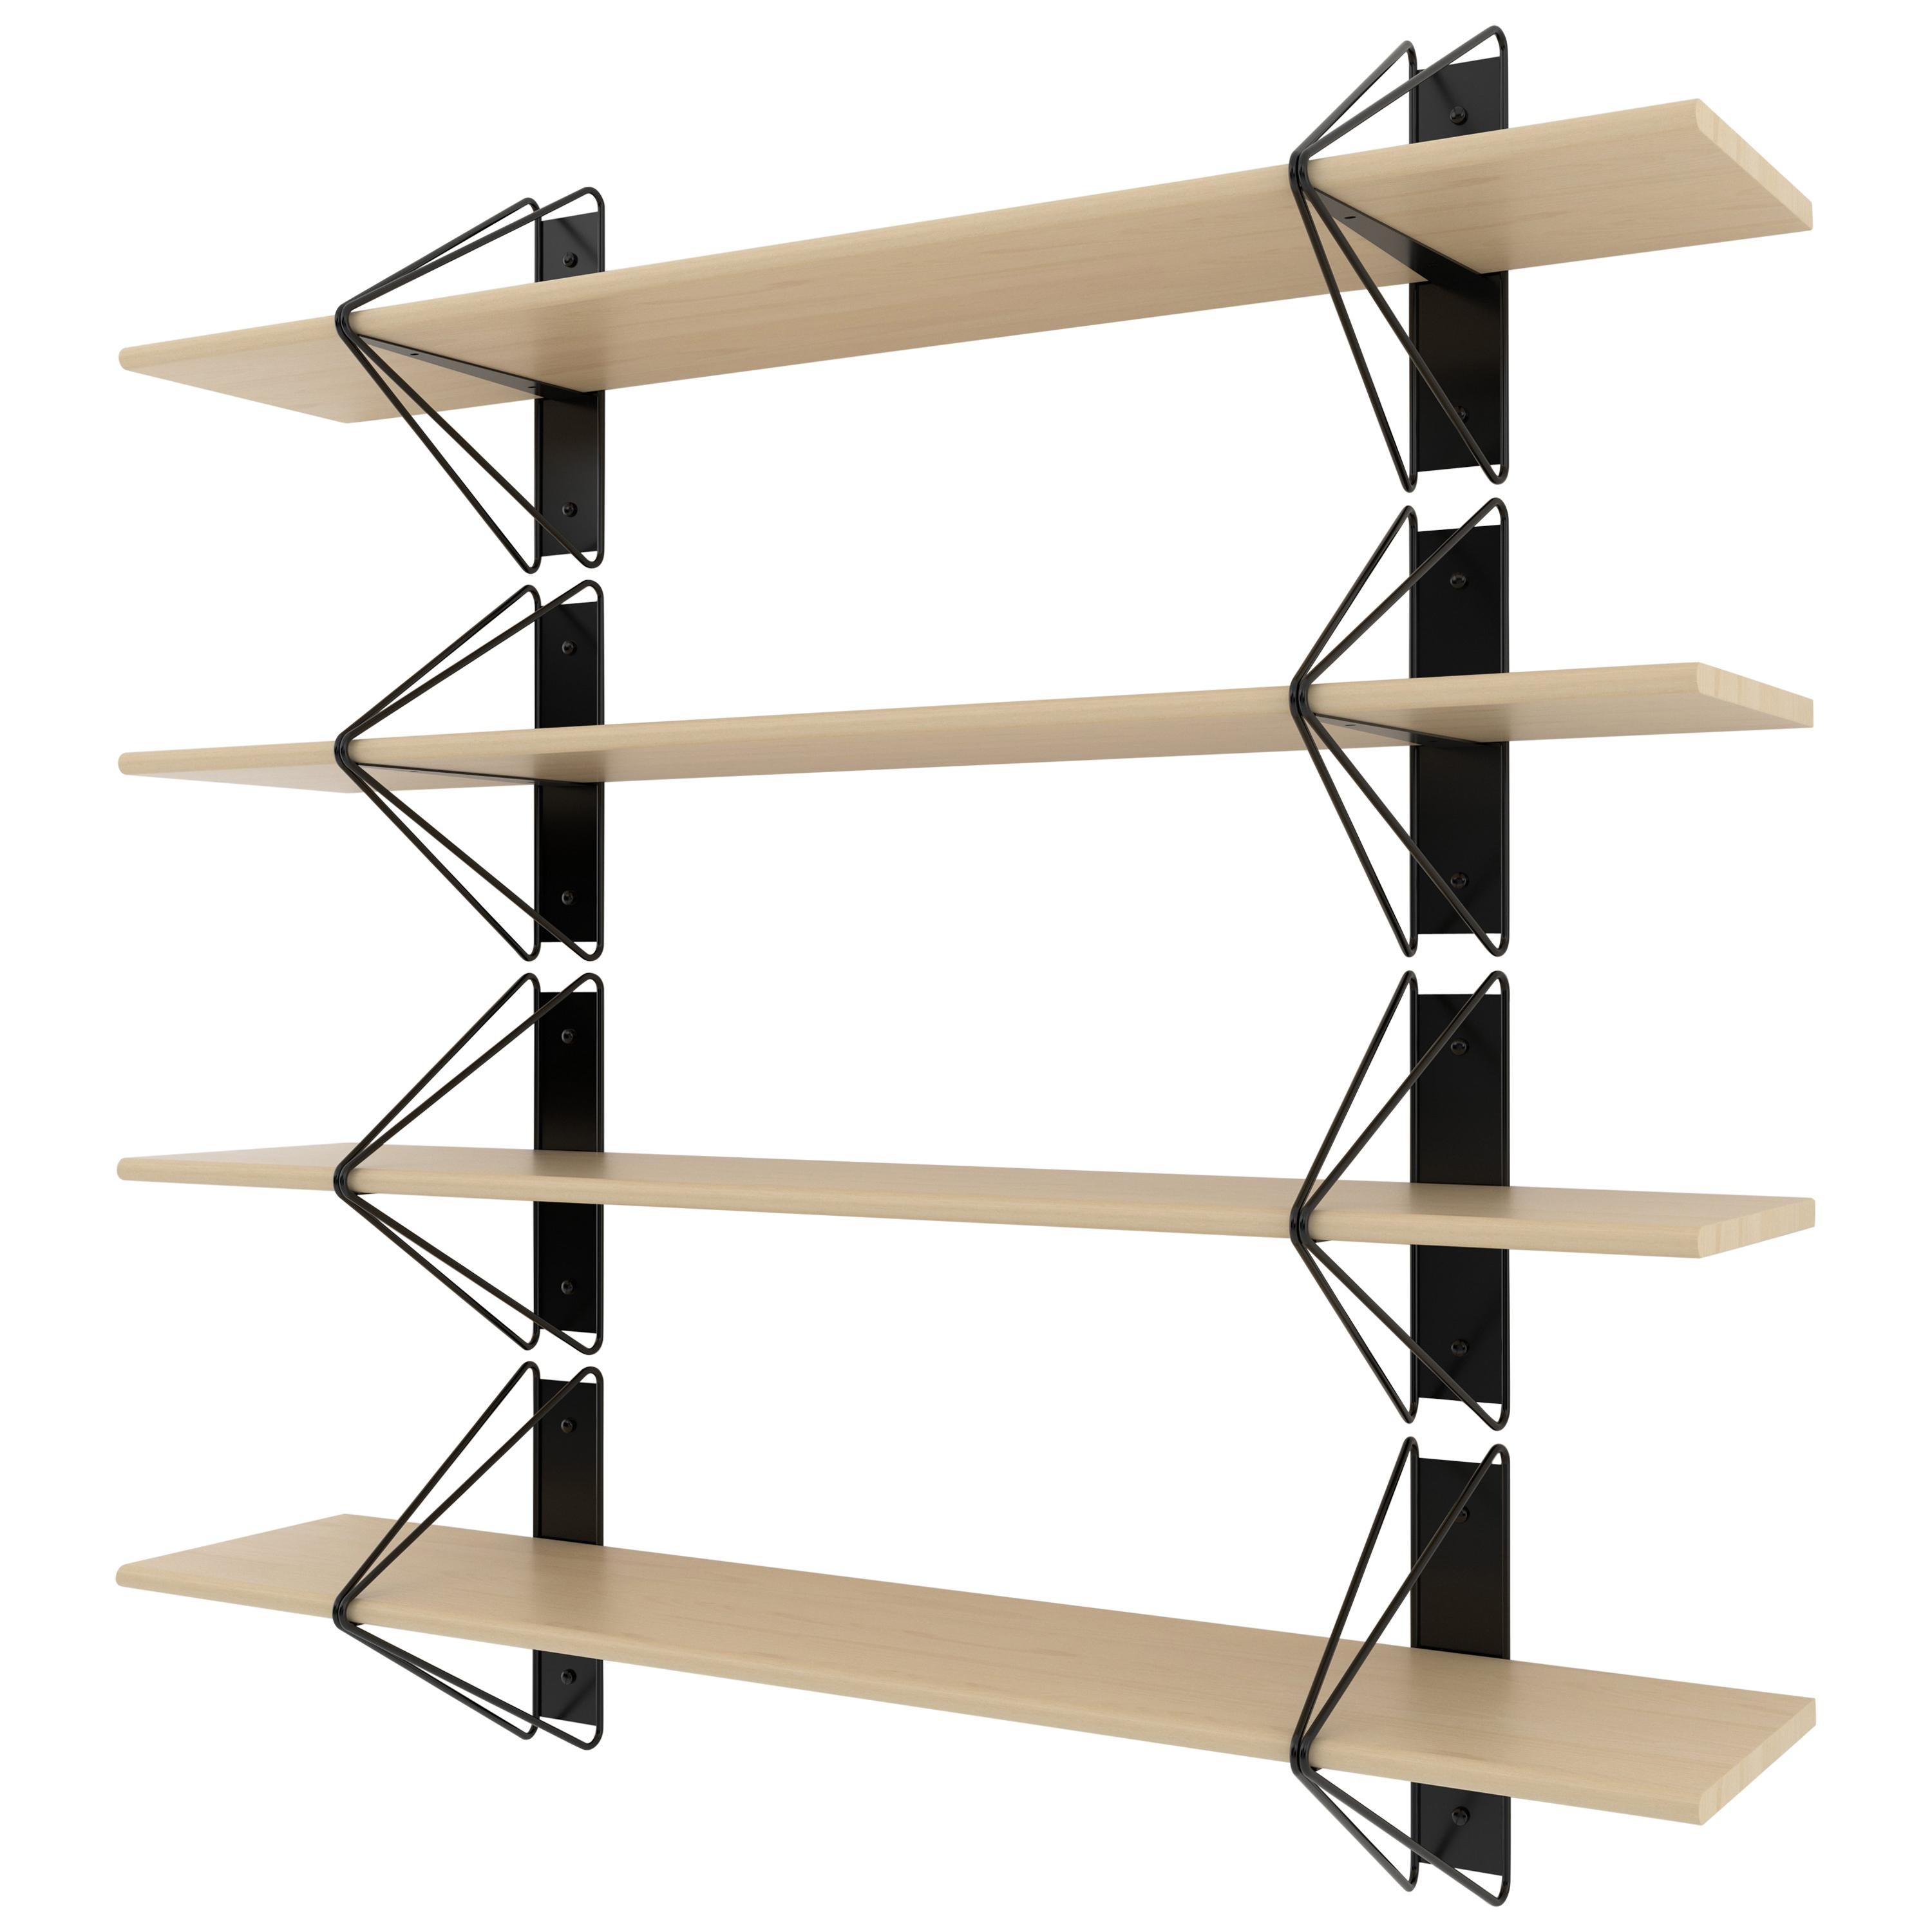 American Set of 4 Strut Shelves from Souda, White and Maple, Made to Order For Sale